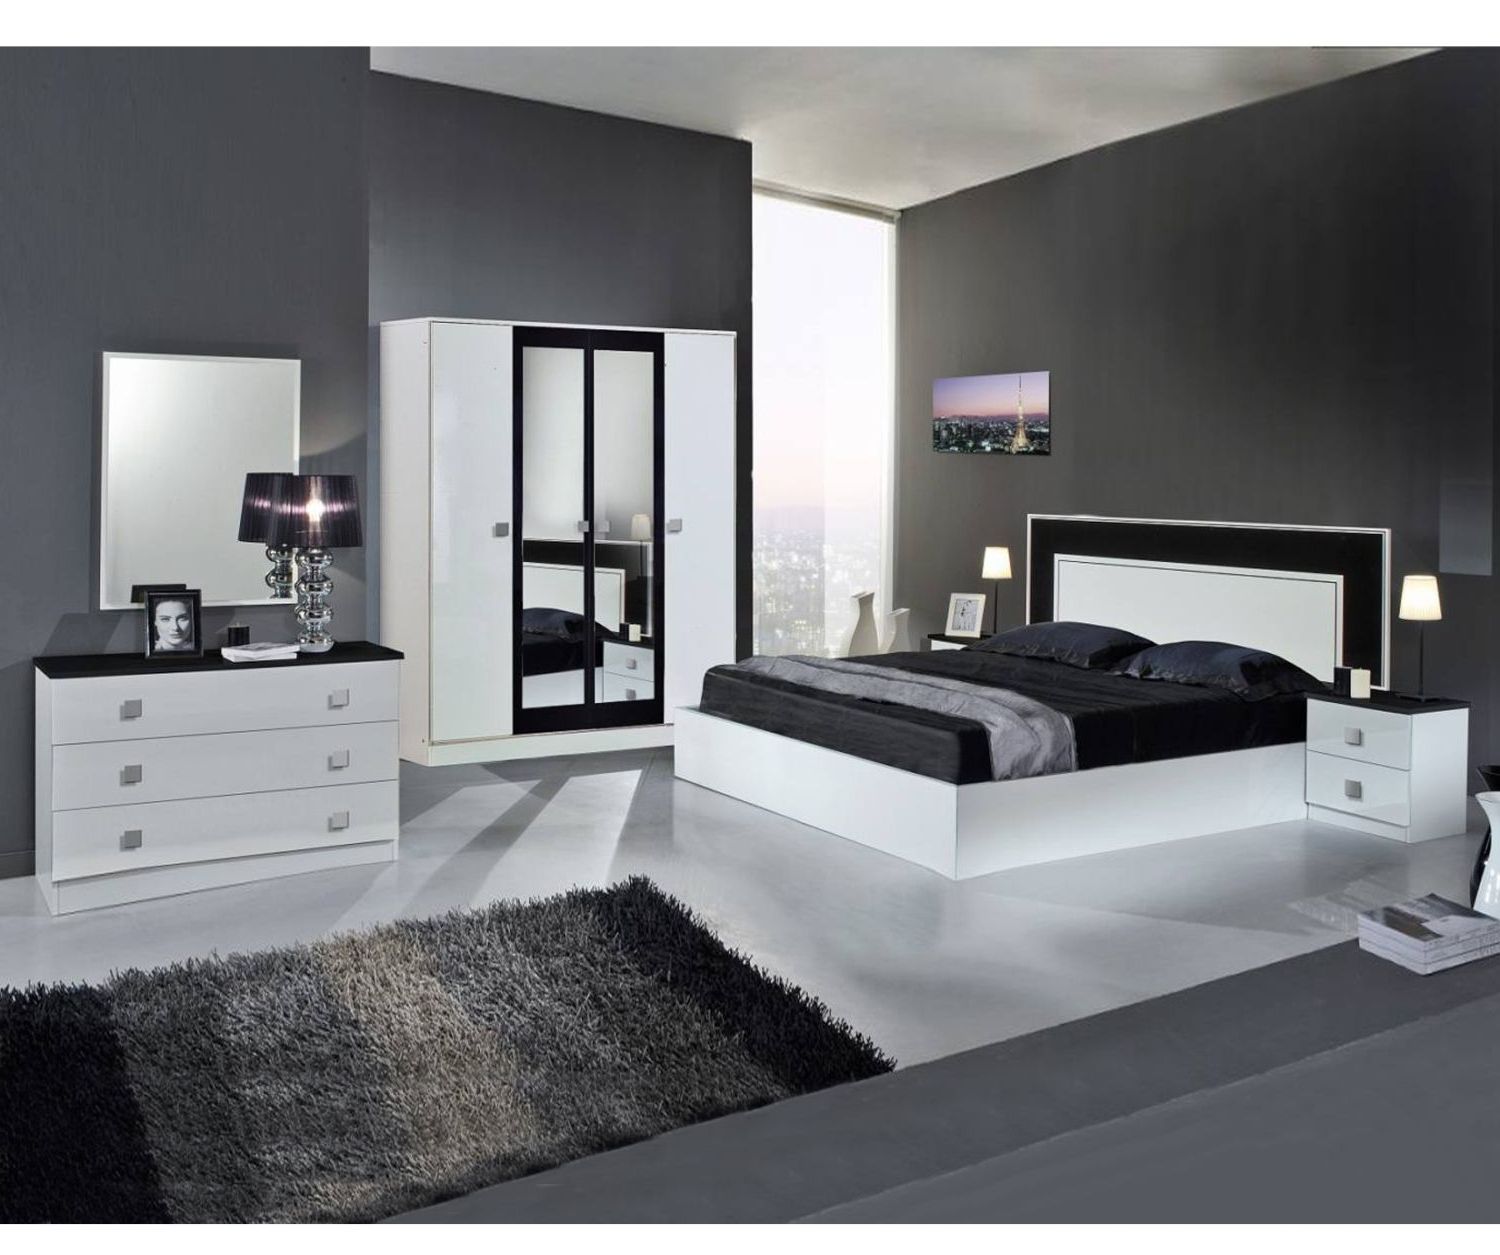 Dima Mobili Amal White And Black Bedroom Set With 4 Door Wardrobe Pertaining To Black And White Wardrobes Set (View 6 of 20)